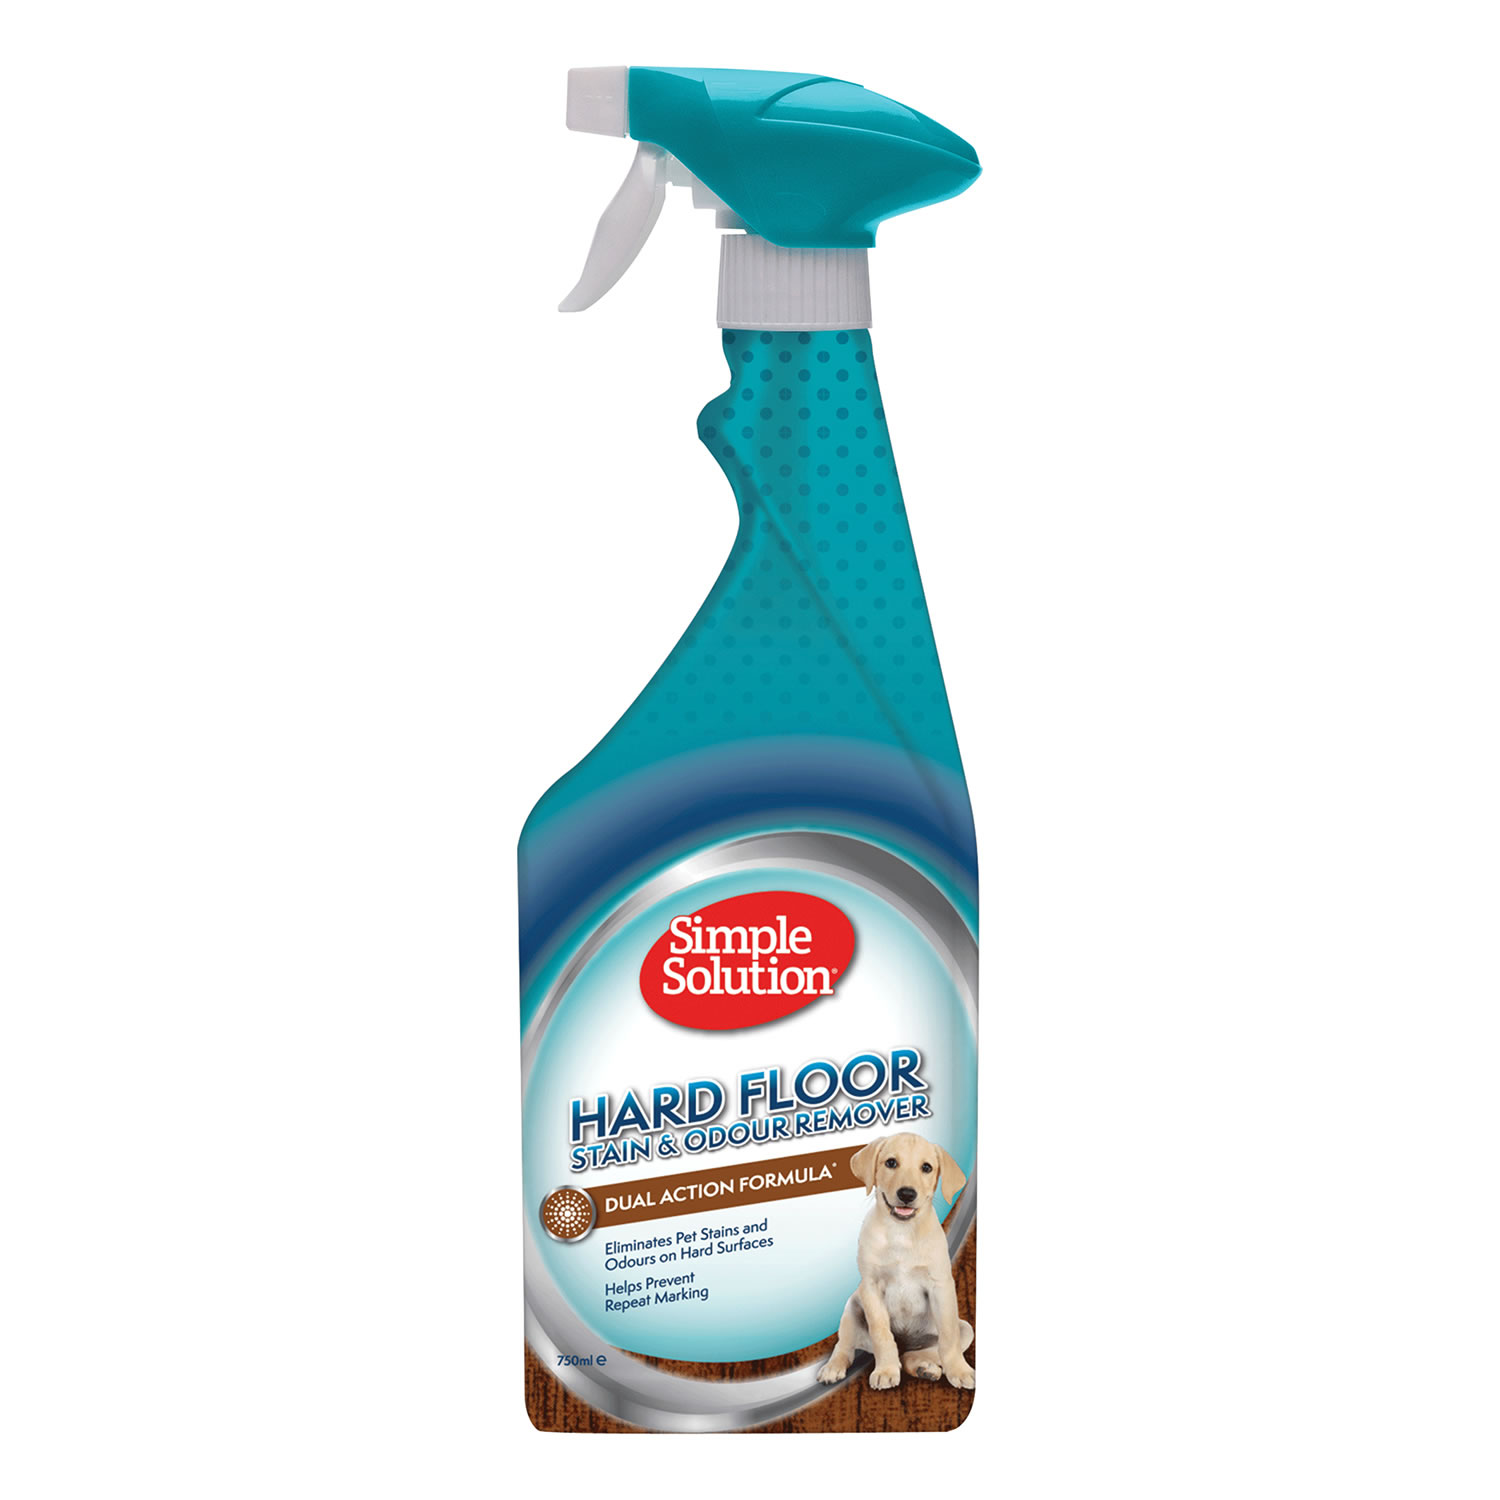 SIMPLE SOLUTION HARD FLOOR STAIN & ODOUR REMOVER 750 ML 750 ML